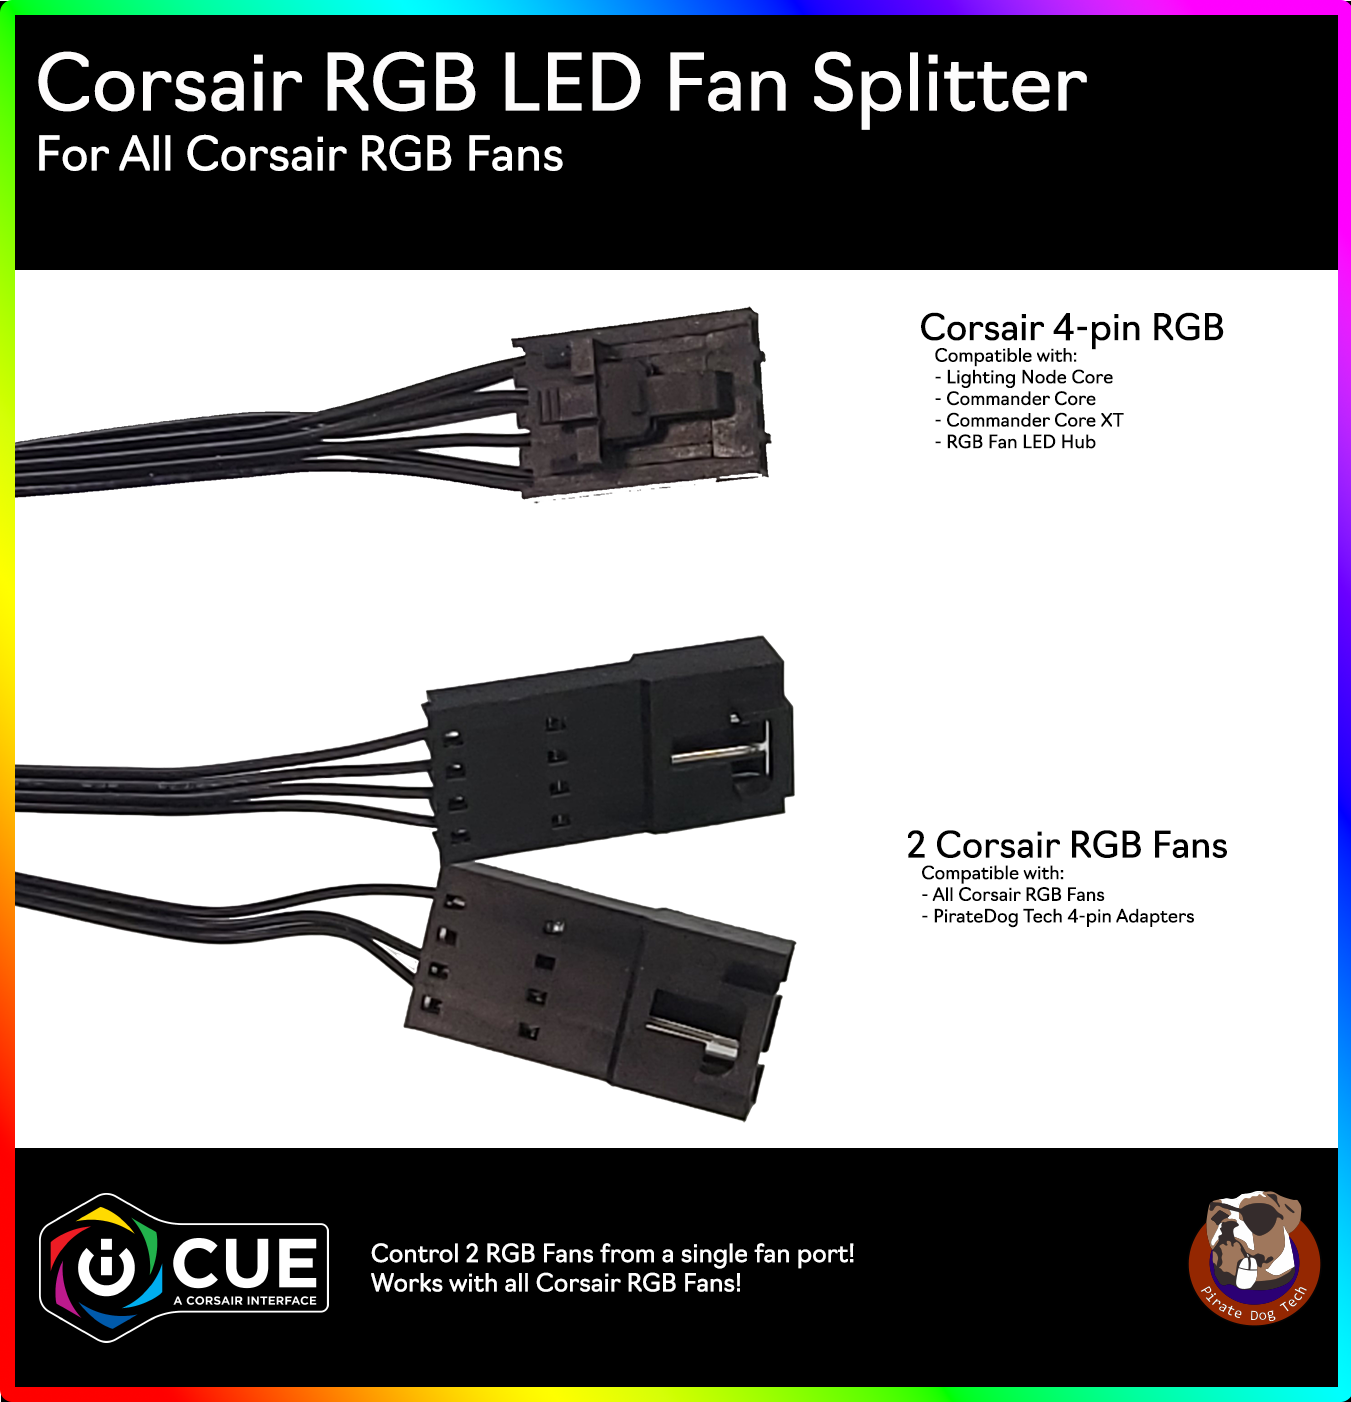 Corsair RGB LED Splitter Fan Direct store Cable New product!!